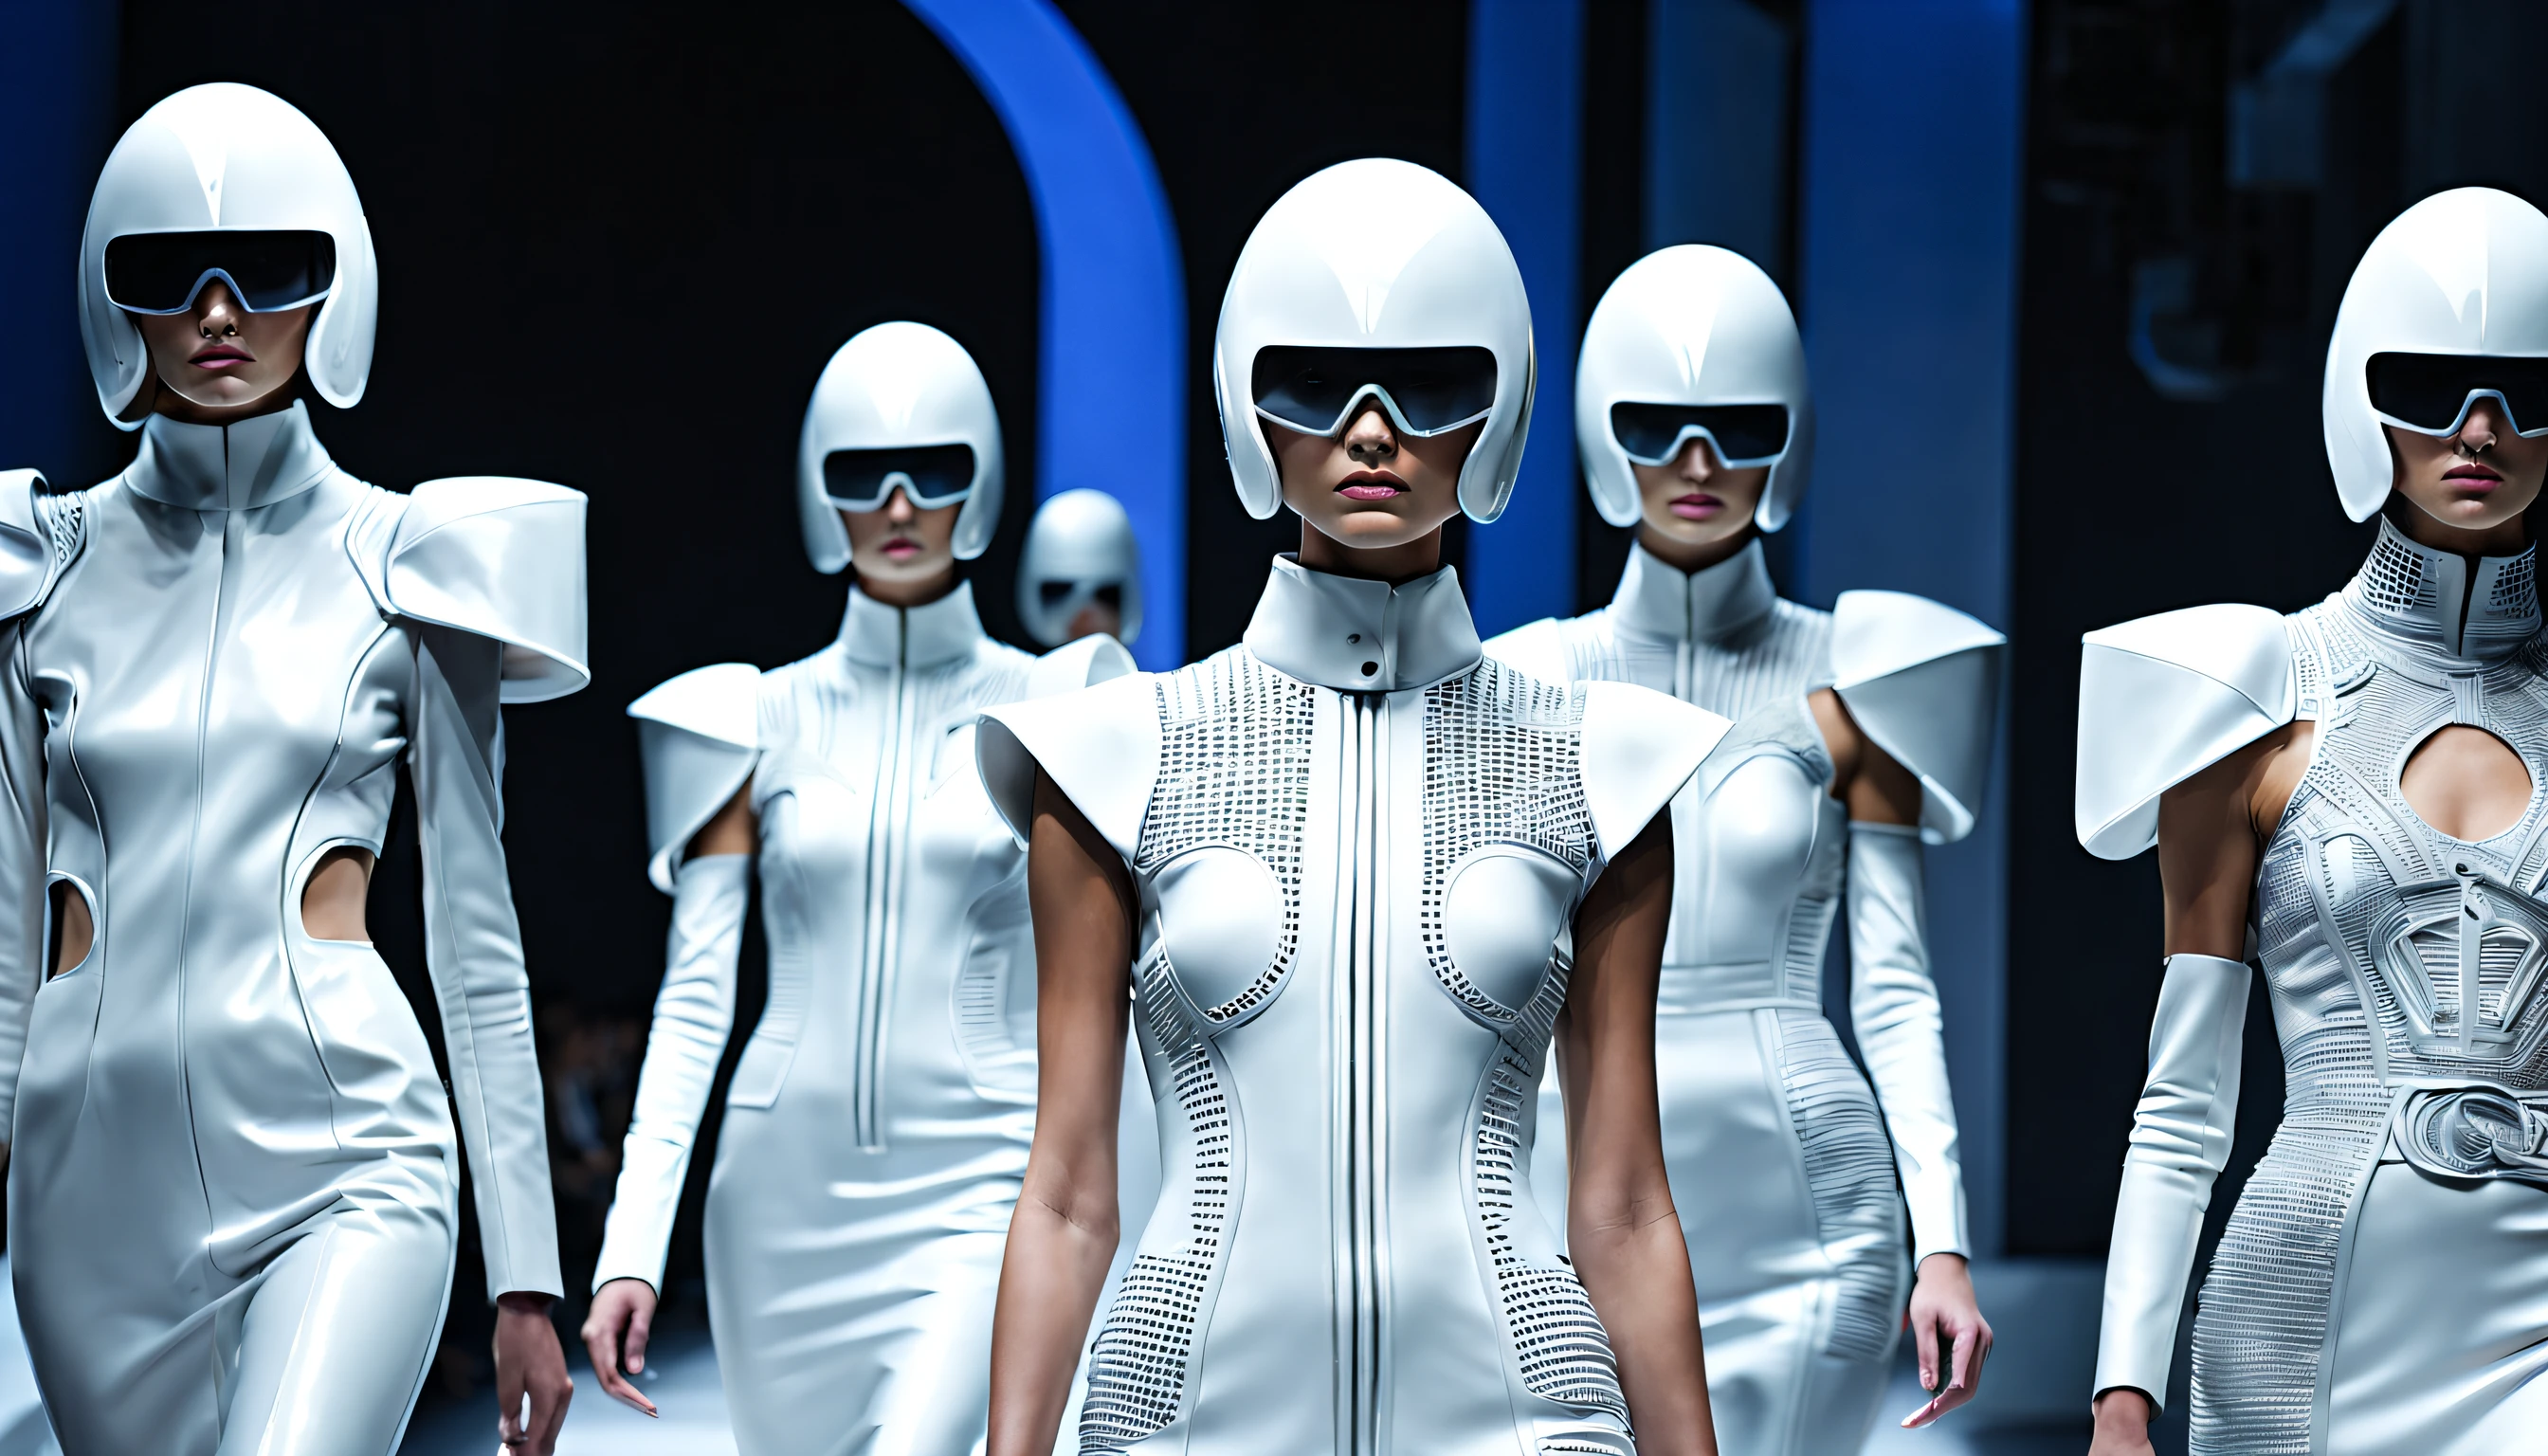 In a futuristic, dystopian world, a high-end fashion show takes place where each model is sponsored by a different corporation and their features are meticulously crafted and manipulated to represent the brand's image. With intricate details and bold statements, these hyper-realistic, corporate-controlled individuals showcase elegant attire that embodies the power and influence of the companies that have engineered them.